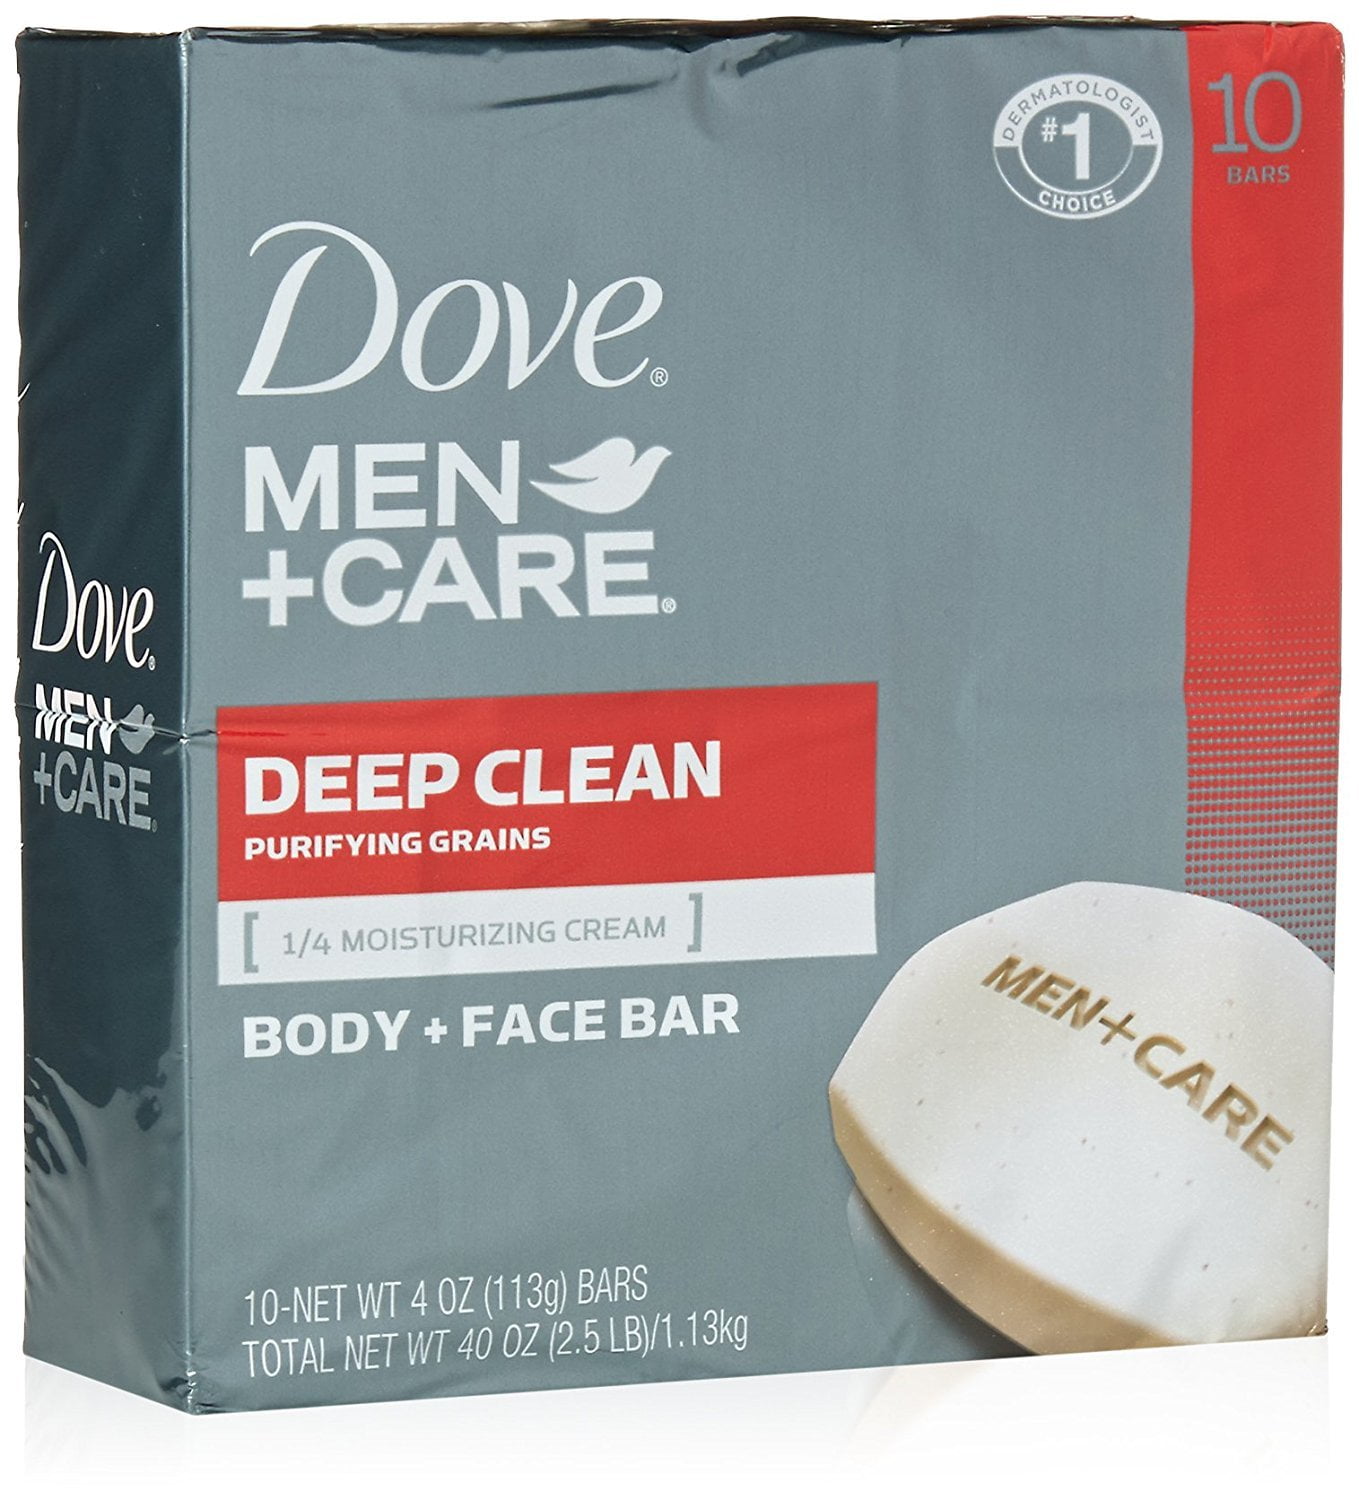 Dove Men+Care Body and Face Bar to Clean and Hydrate Skin Extra Fresh Body  and Facial Cleanser More Moisturizing Than Bar Soap 3.75 oz 4 Bars